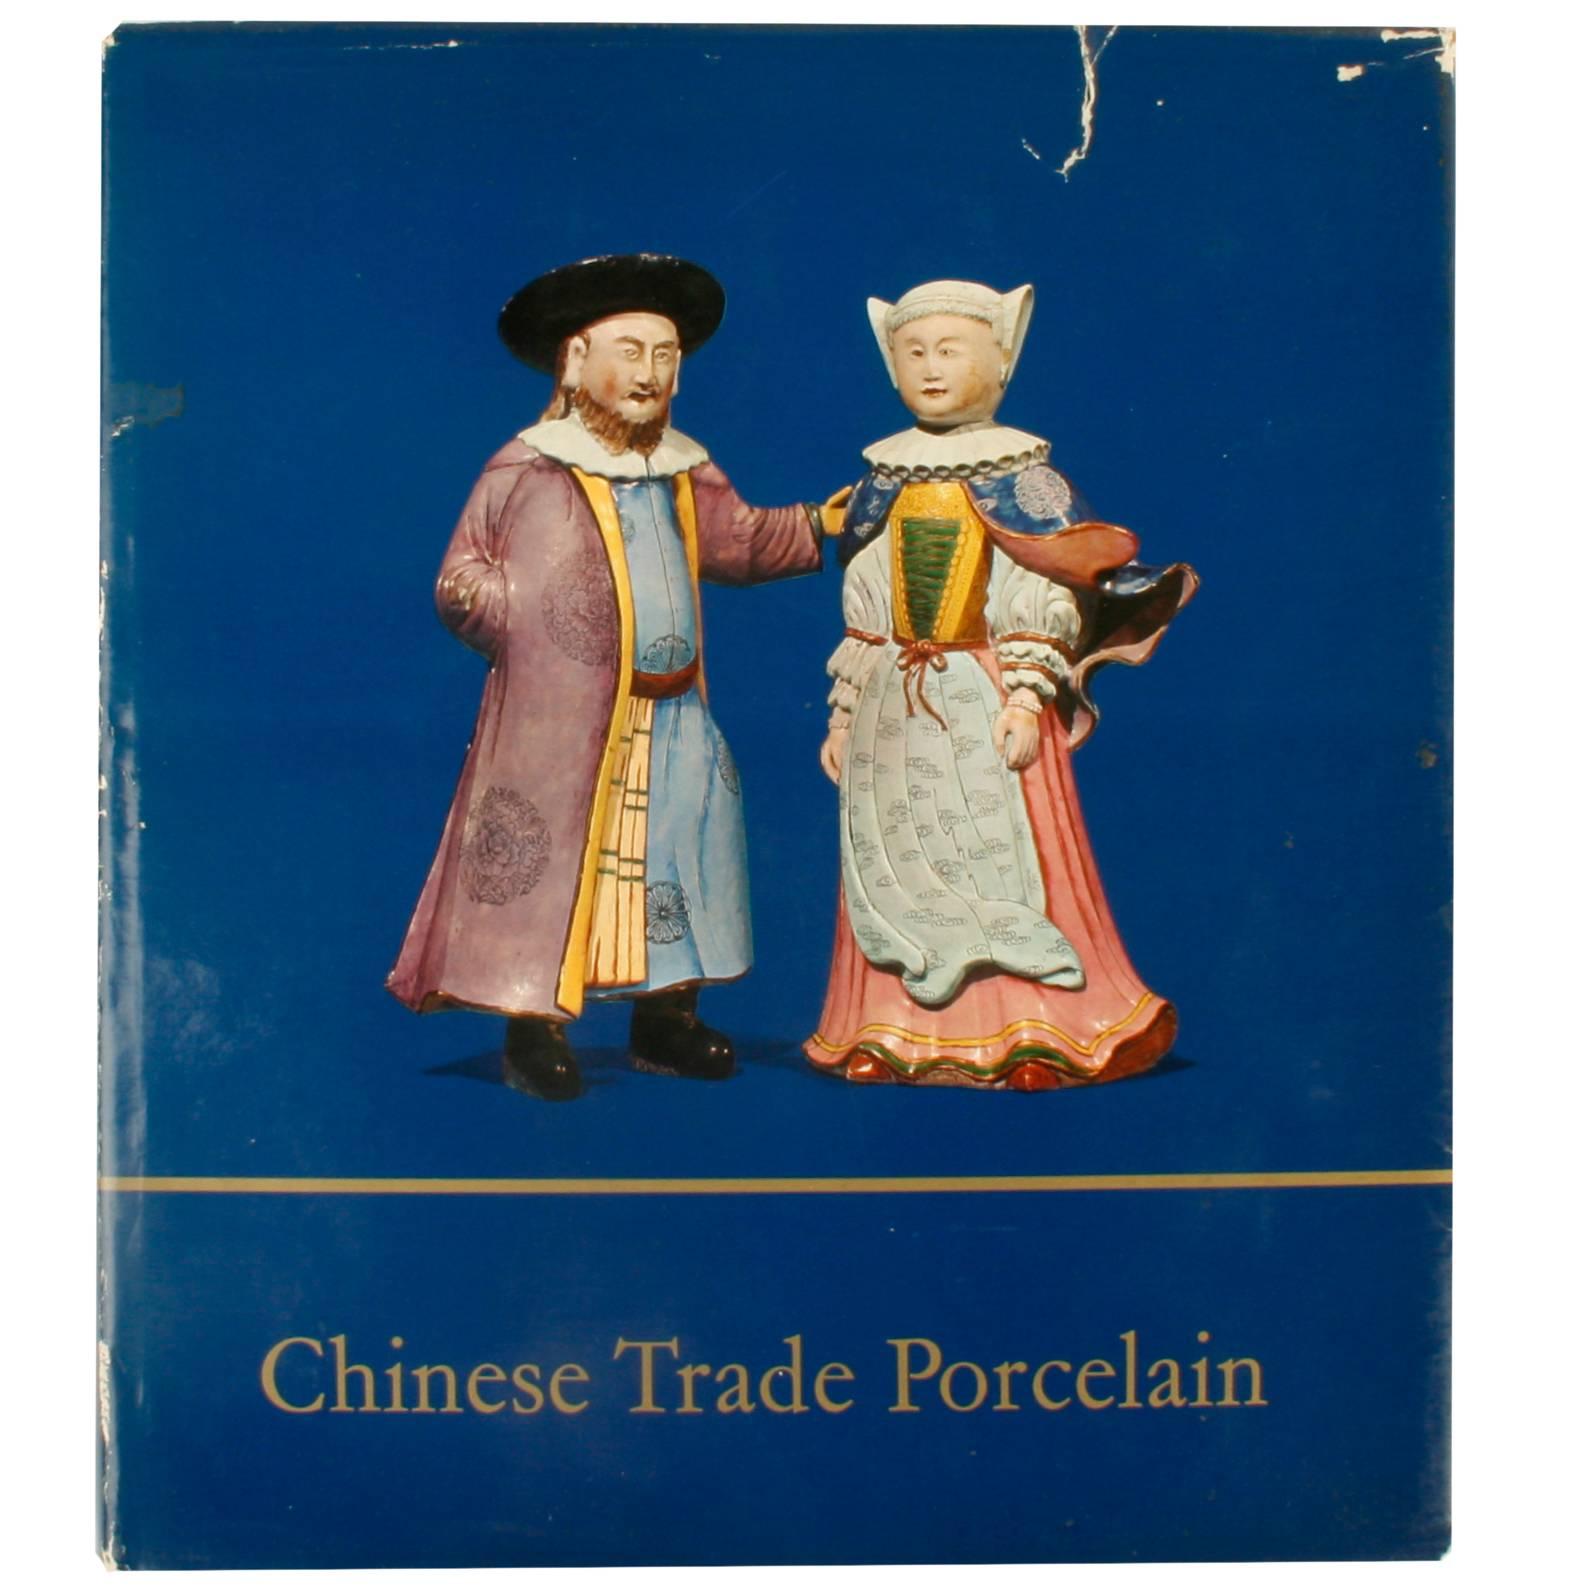 Chinese Trade Porcelain, First Edition by Michel Beurdeley